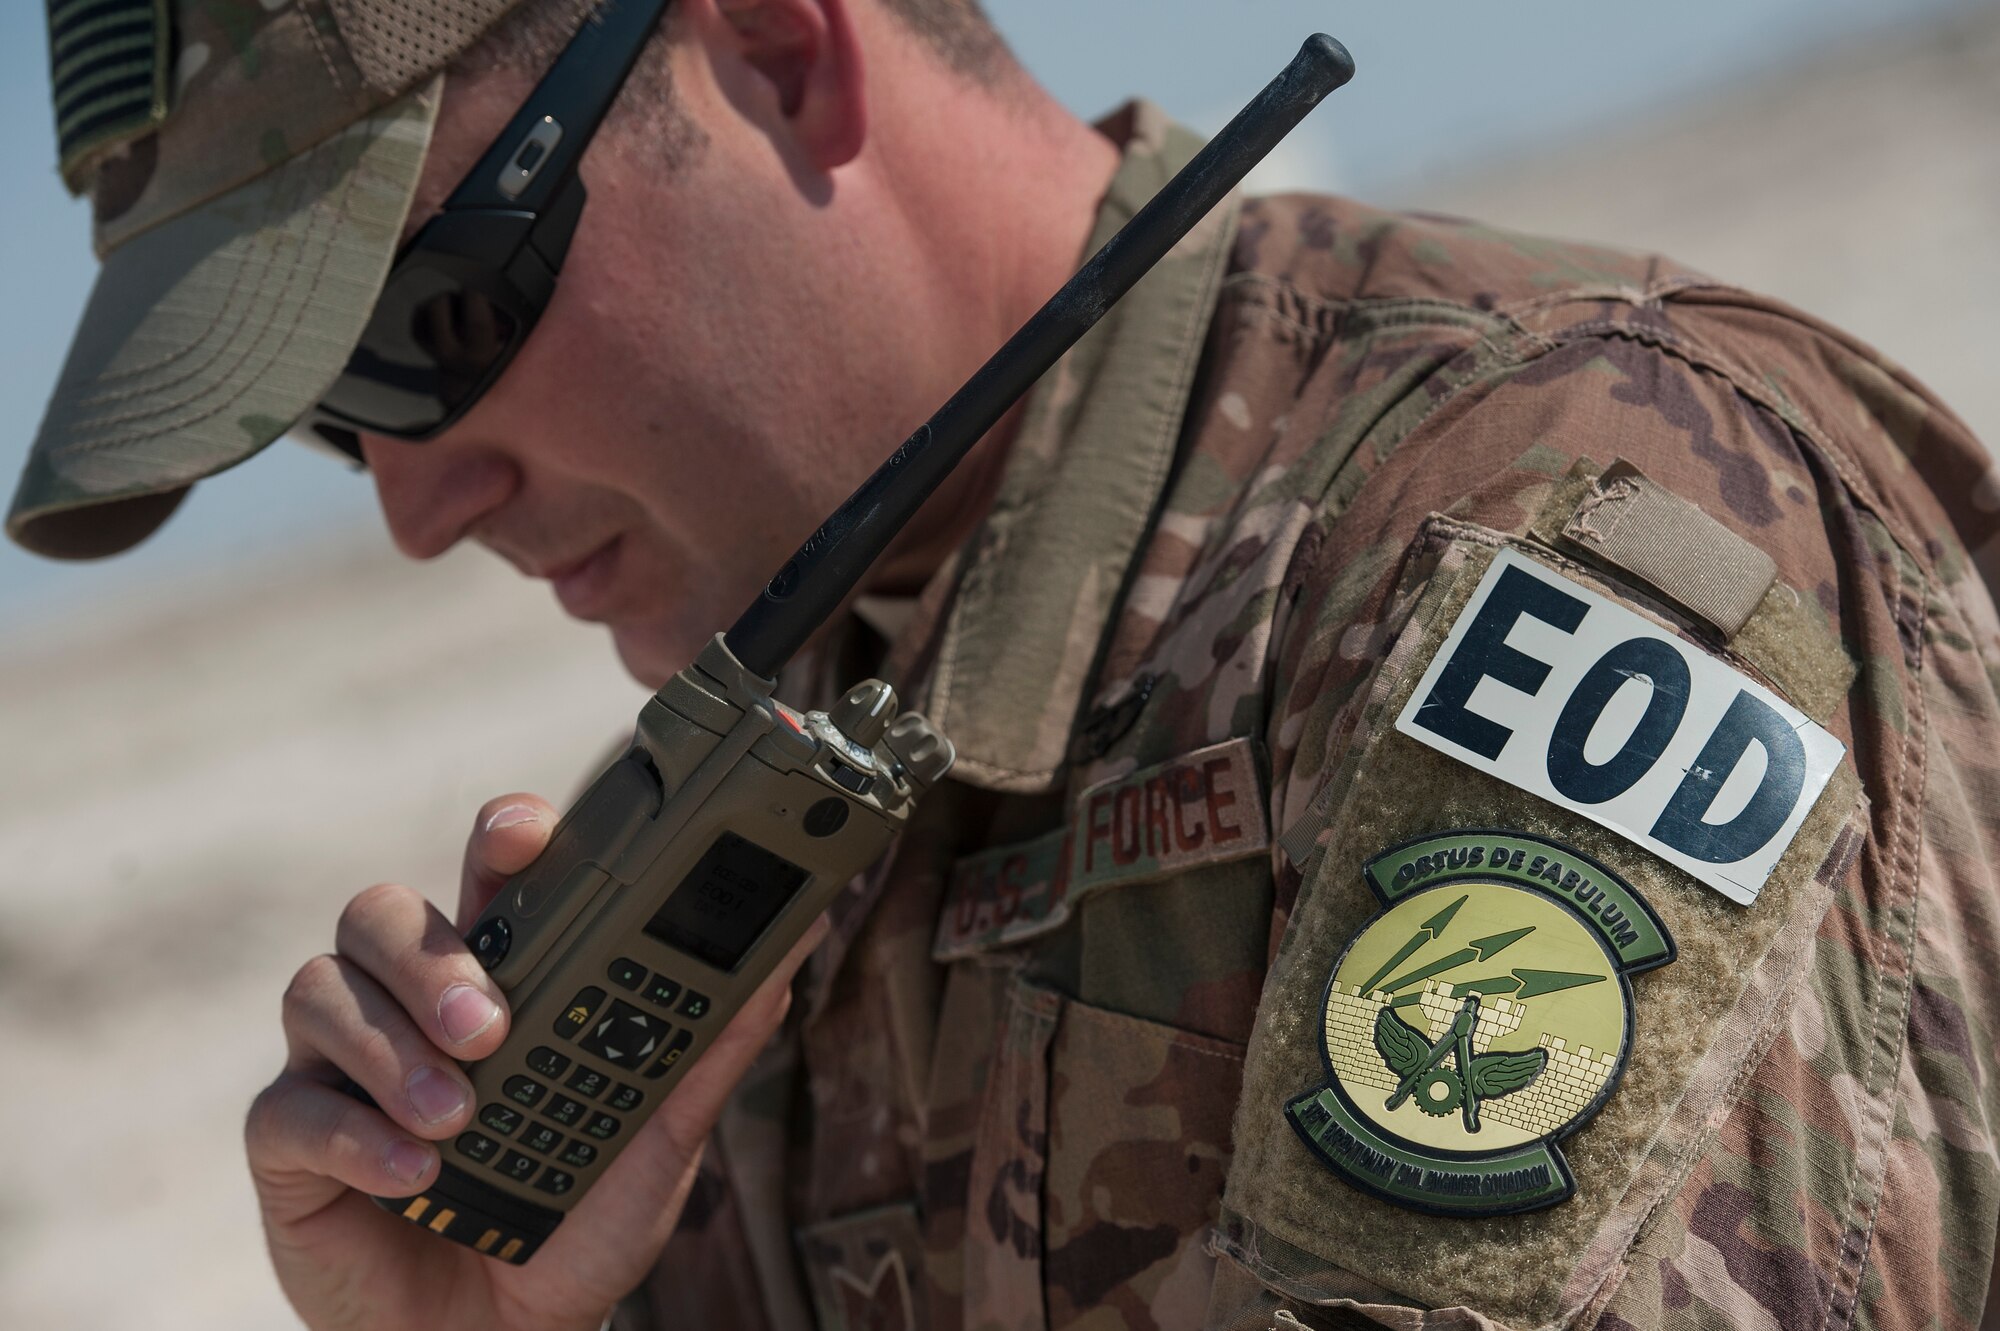 Tech. Sgt. Matthew Workoff, 379th Expeditionary Civil Engineer Squadron explosive, ordnance, and disposal (EOD) team leader, coordinates a scenario for a vehicle borne improvised explosive device (VBIED) response training exercise Dec. 18, 2018, at Al Udeid Air Base, Qatar. Training participants utilized an F6A robotic platform, the bomb suit, and other specific tools to disrupt a VBIED during the exercise. (U.S. Air Force photo by Tech. Sgt. Christopher Hubenthal)